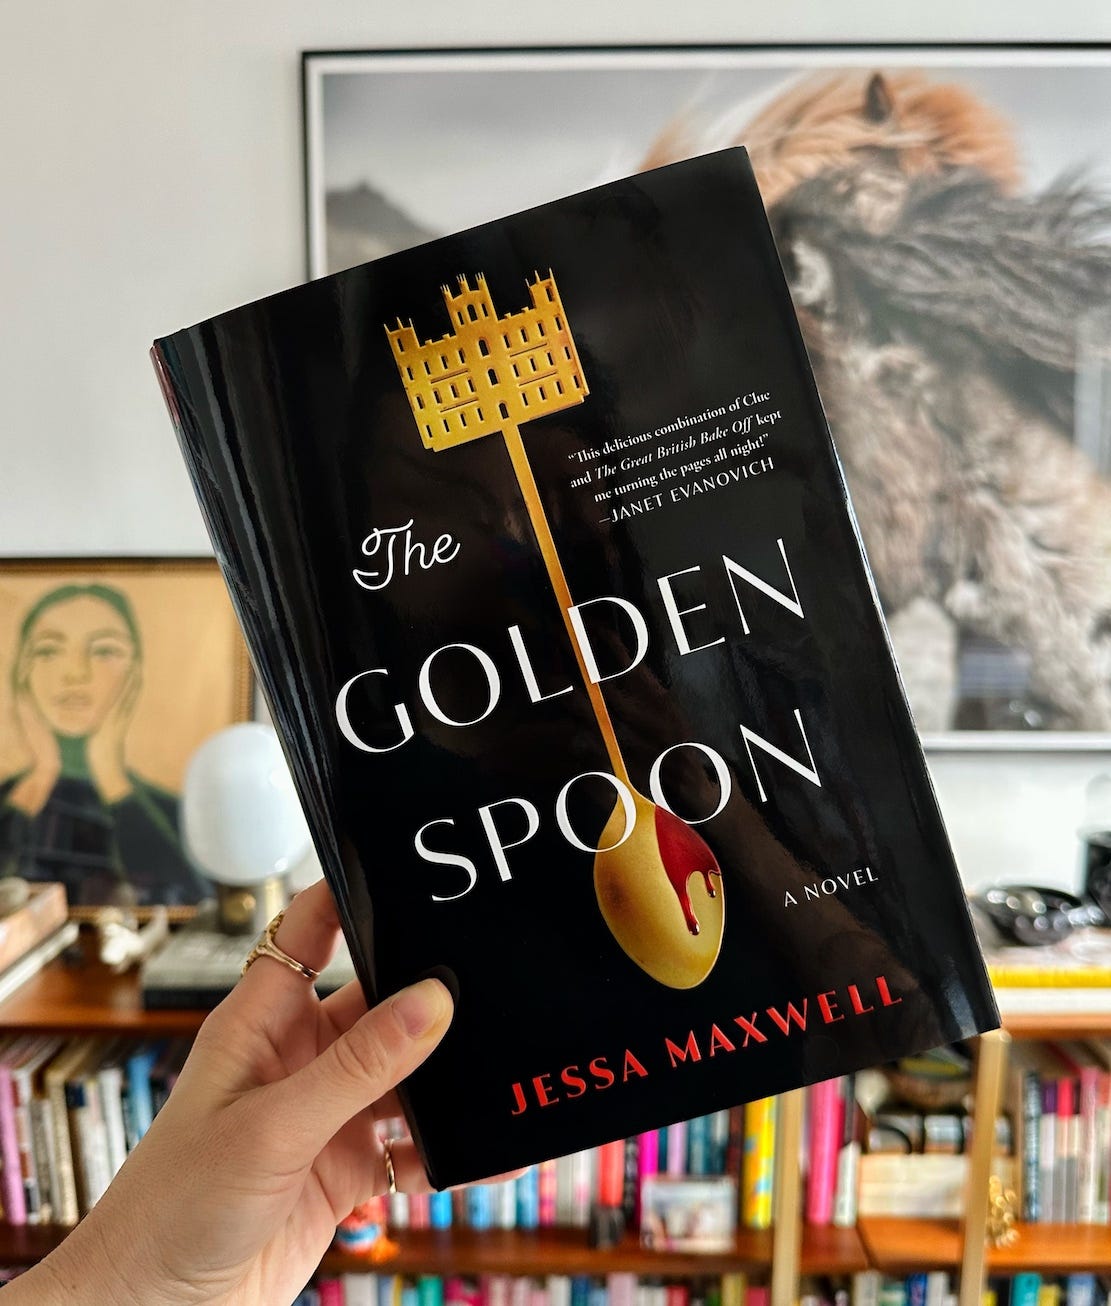 The Golden Spoon, Book by Jessa Maxwell, Official Publisher Page